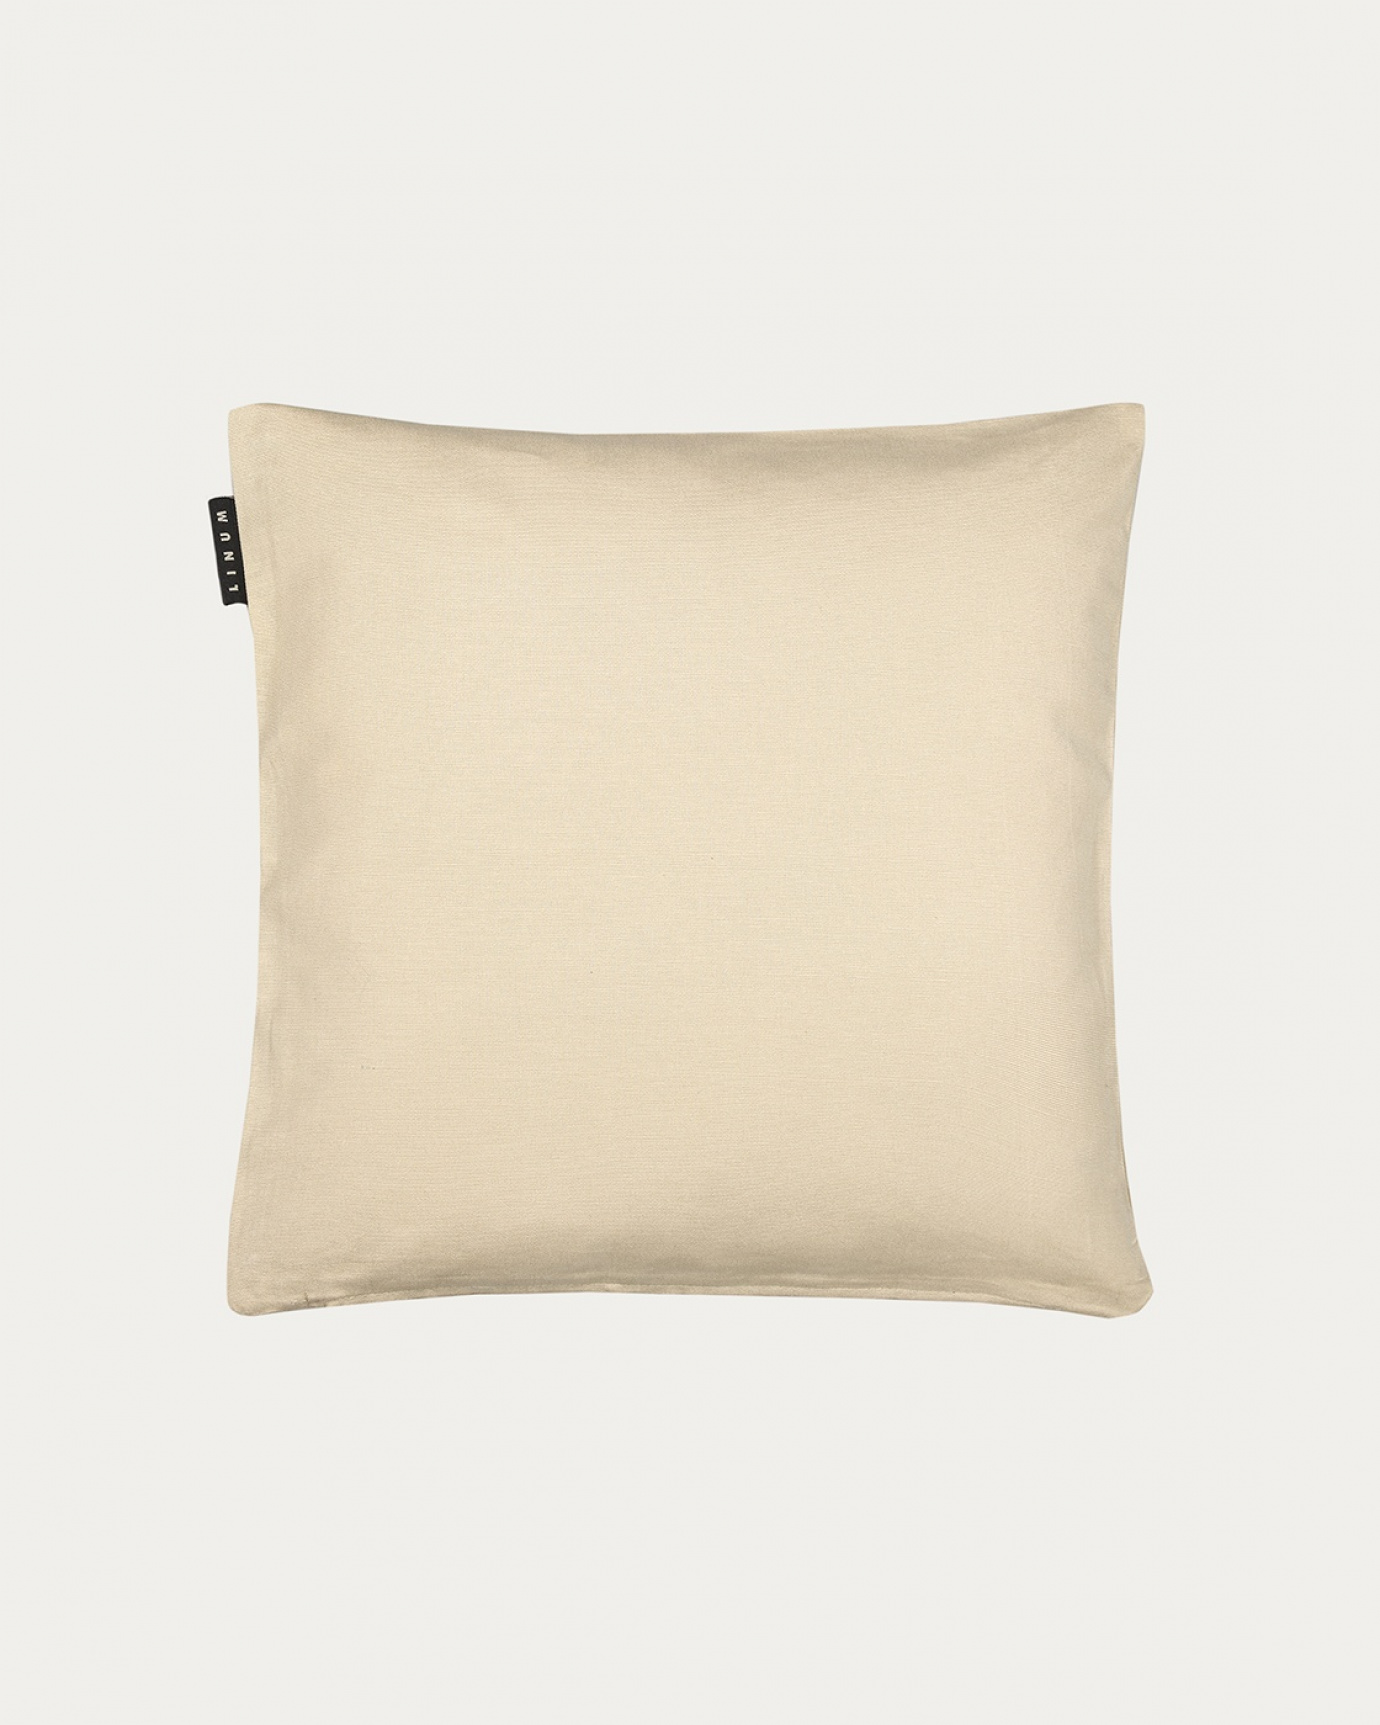 Product image warm beige ANNABELL cushion cover made of soft cotton from LINUM DESIGN. Size 40x40 cm.